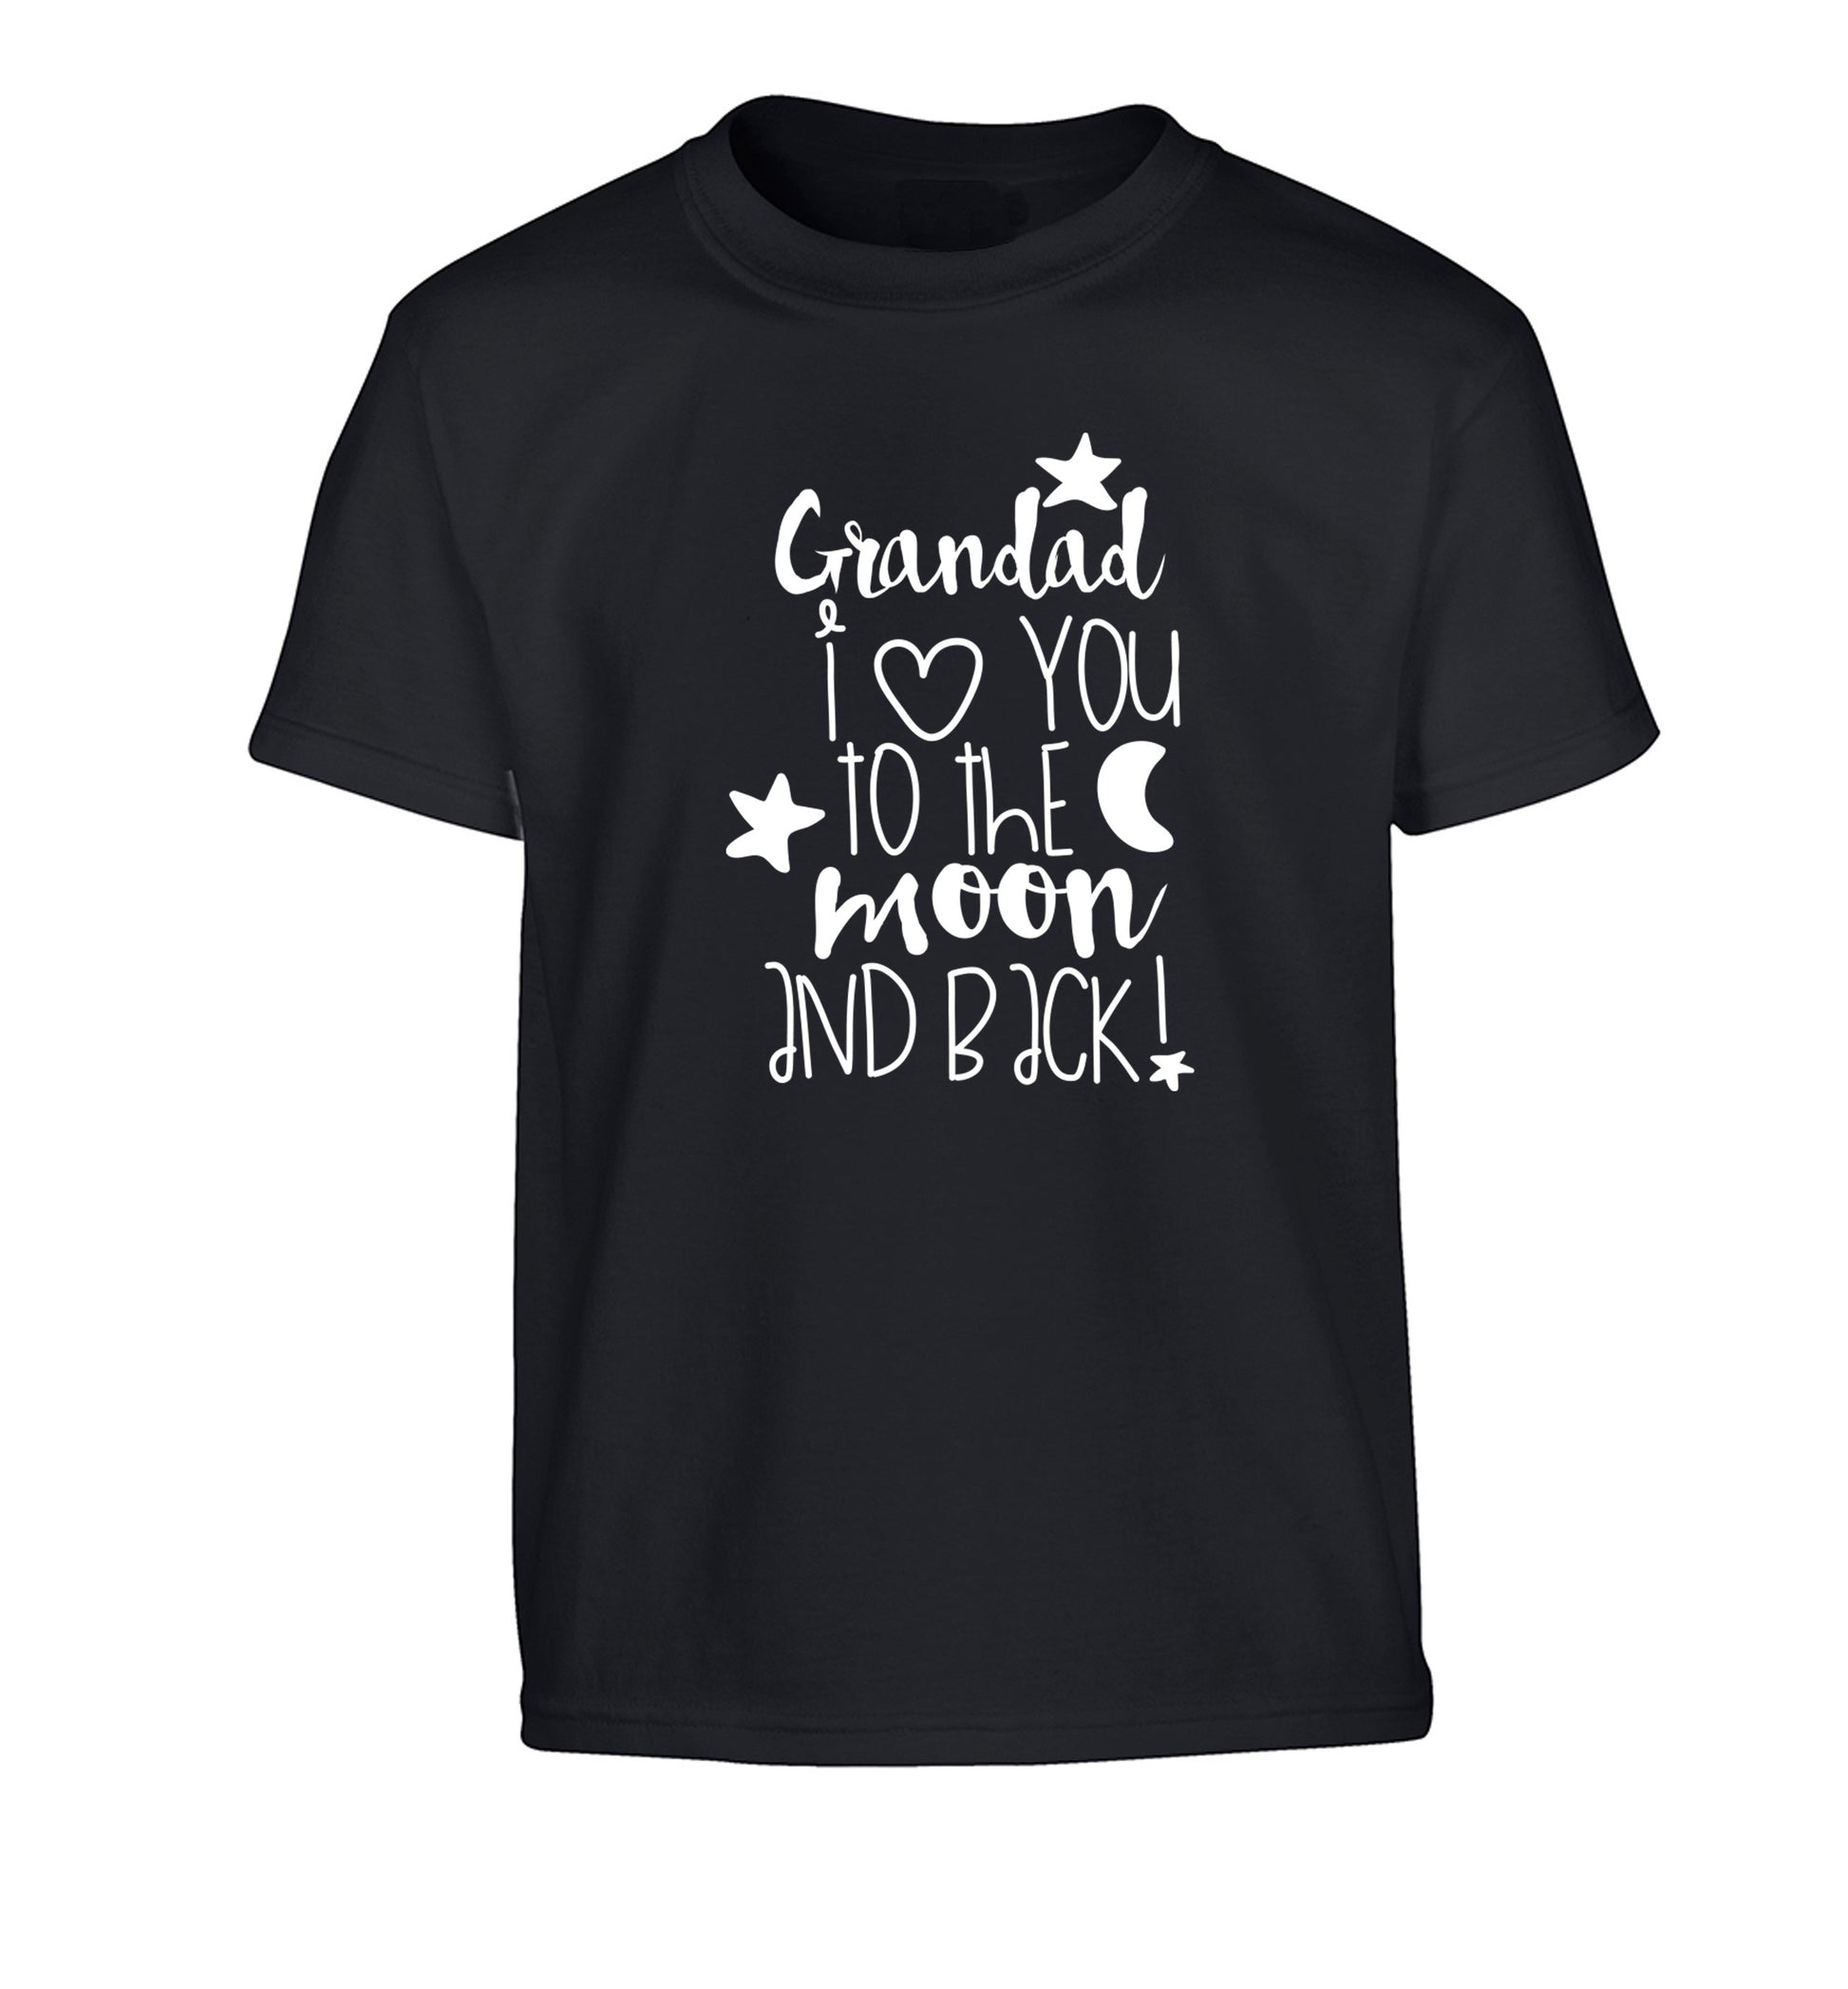 Grandad's I love you to the moon and back Children's black Tshirt 12-14 Years